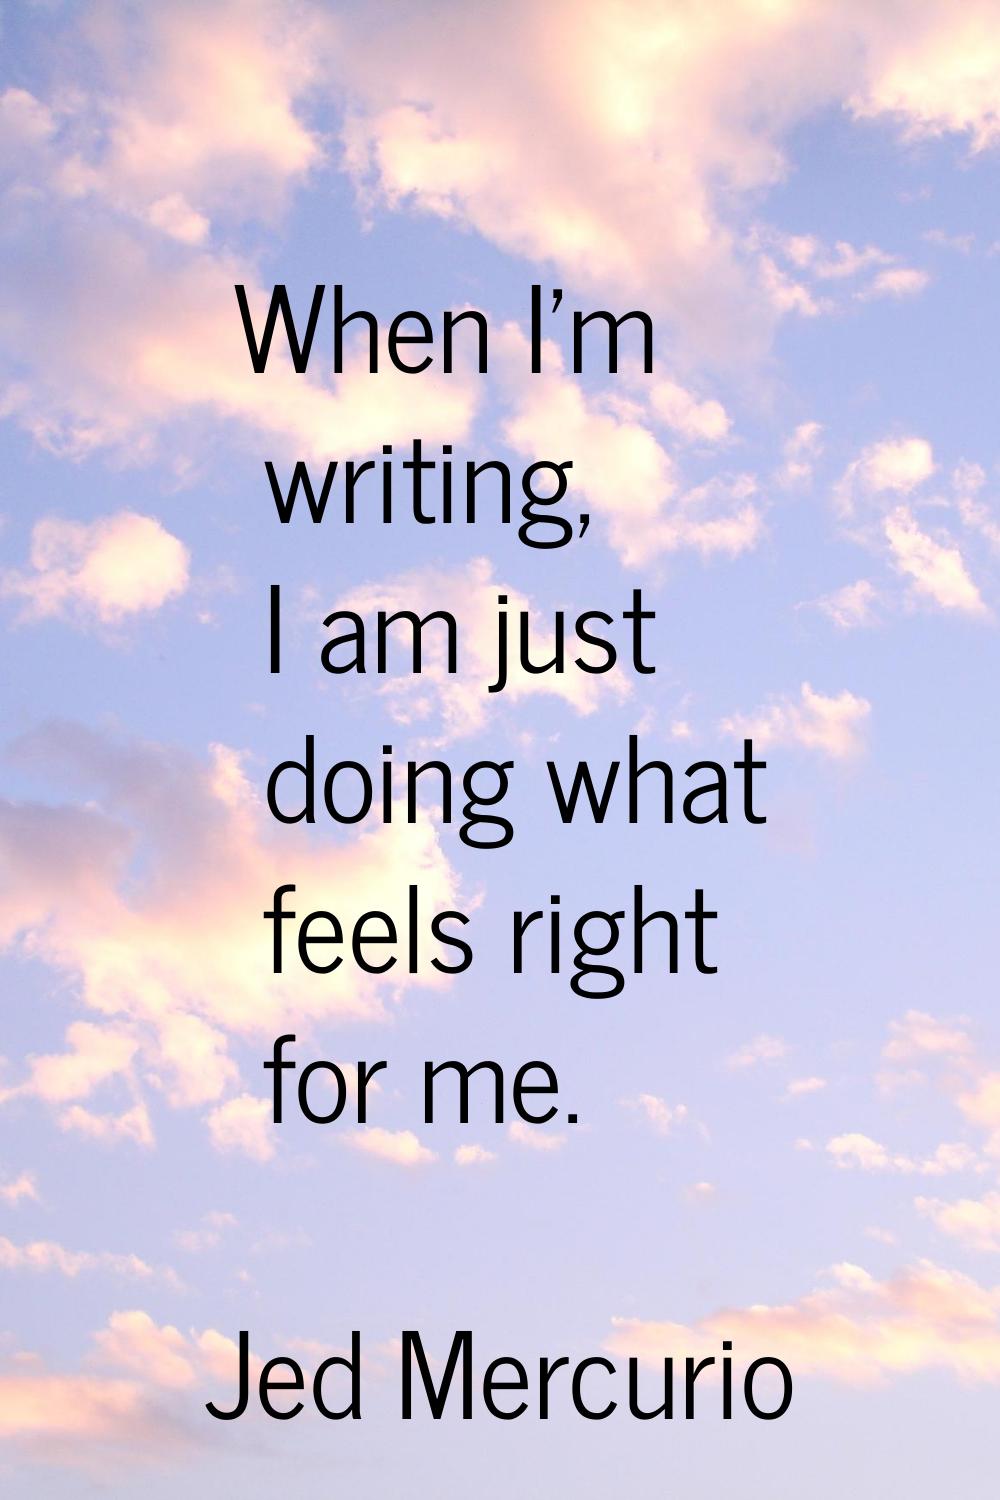 When I'm writing, I am just doing what feels right for me.